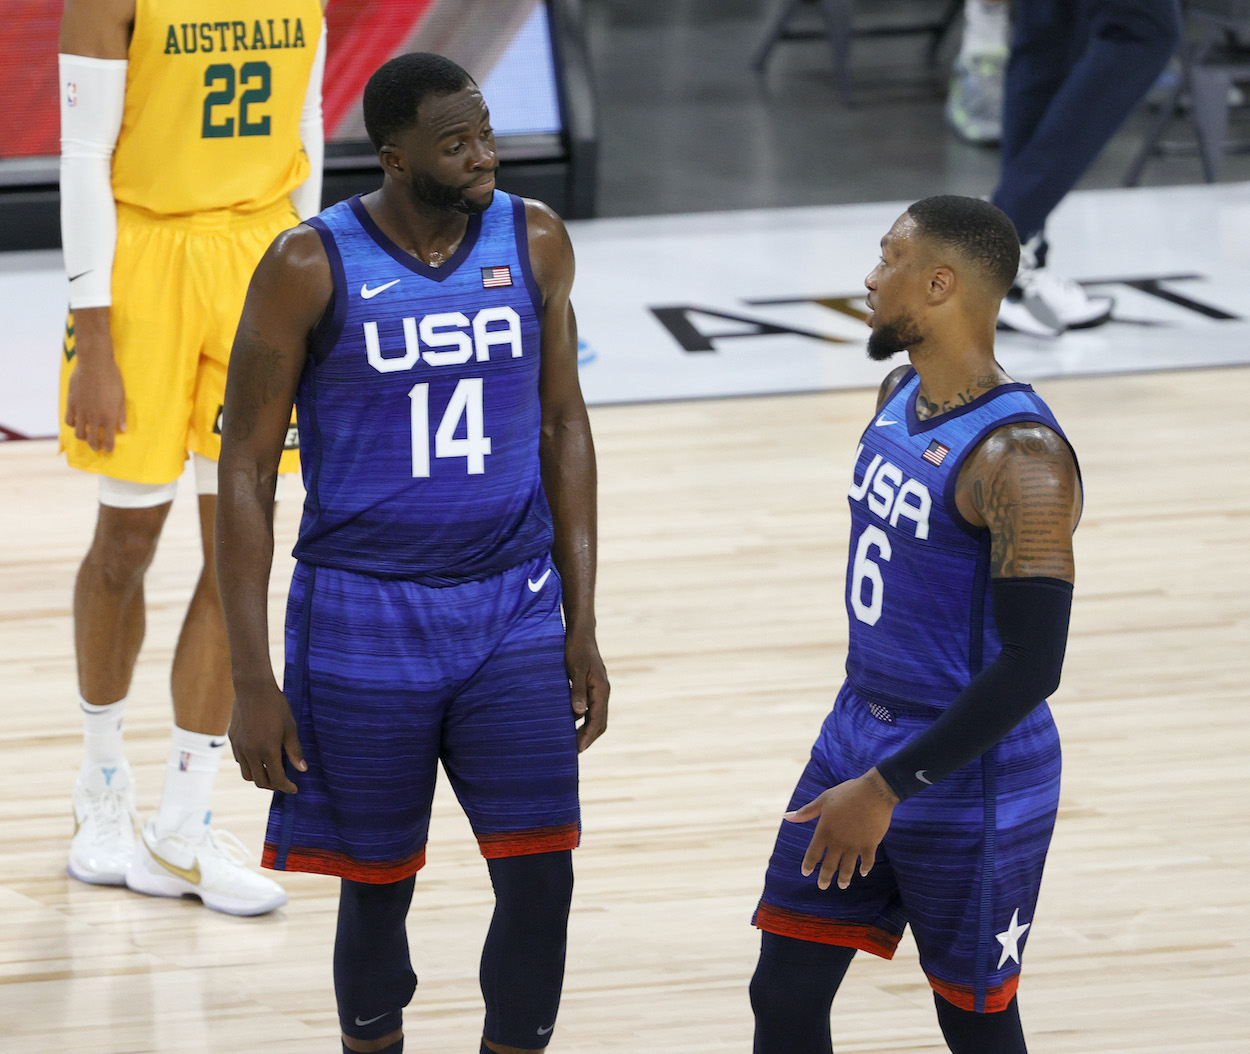 Draymond Green and Damian Lillard of Team USA talk during an exhibition game against the Australia Boomers at Michelob Ultra Arena ahead of the Tokyo Olympic Games on July 12, 2021 in Las Vegas, Nevada. Australia defeated the United States 91-83.